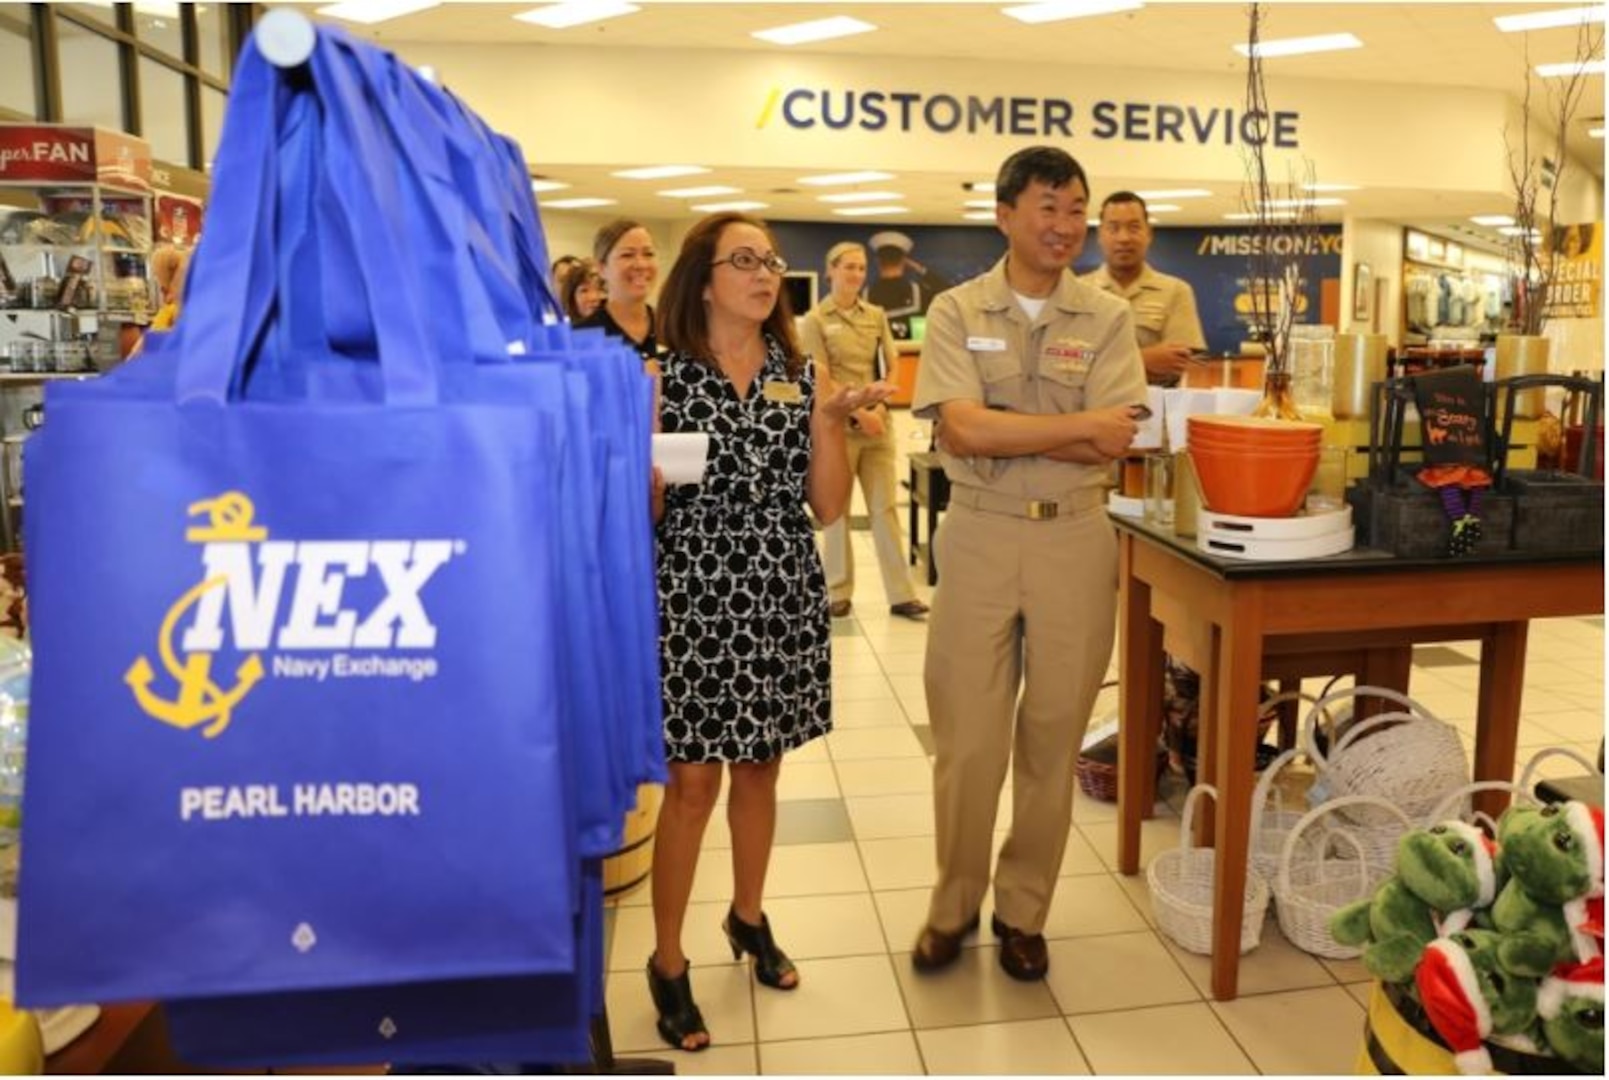 In an effort to meet service members and their families where they conduct their day to day lives, Naval Health Clinic Hawaii (NHCH), Tripler Army Medical Center, and the American Red Cross joined together to bring the COVID-19 vaccine to the Navy Exchange (NEX) at Pearl Harbor, Hawaii.